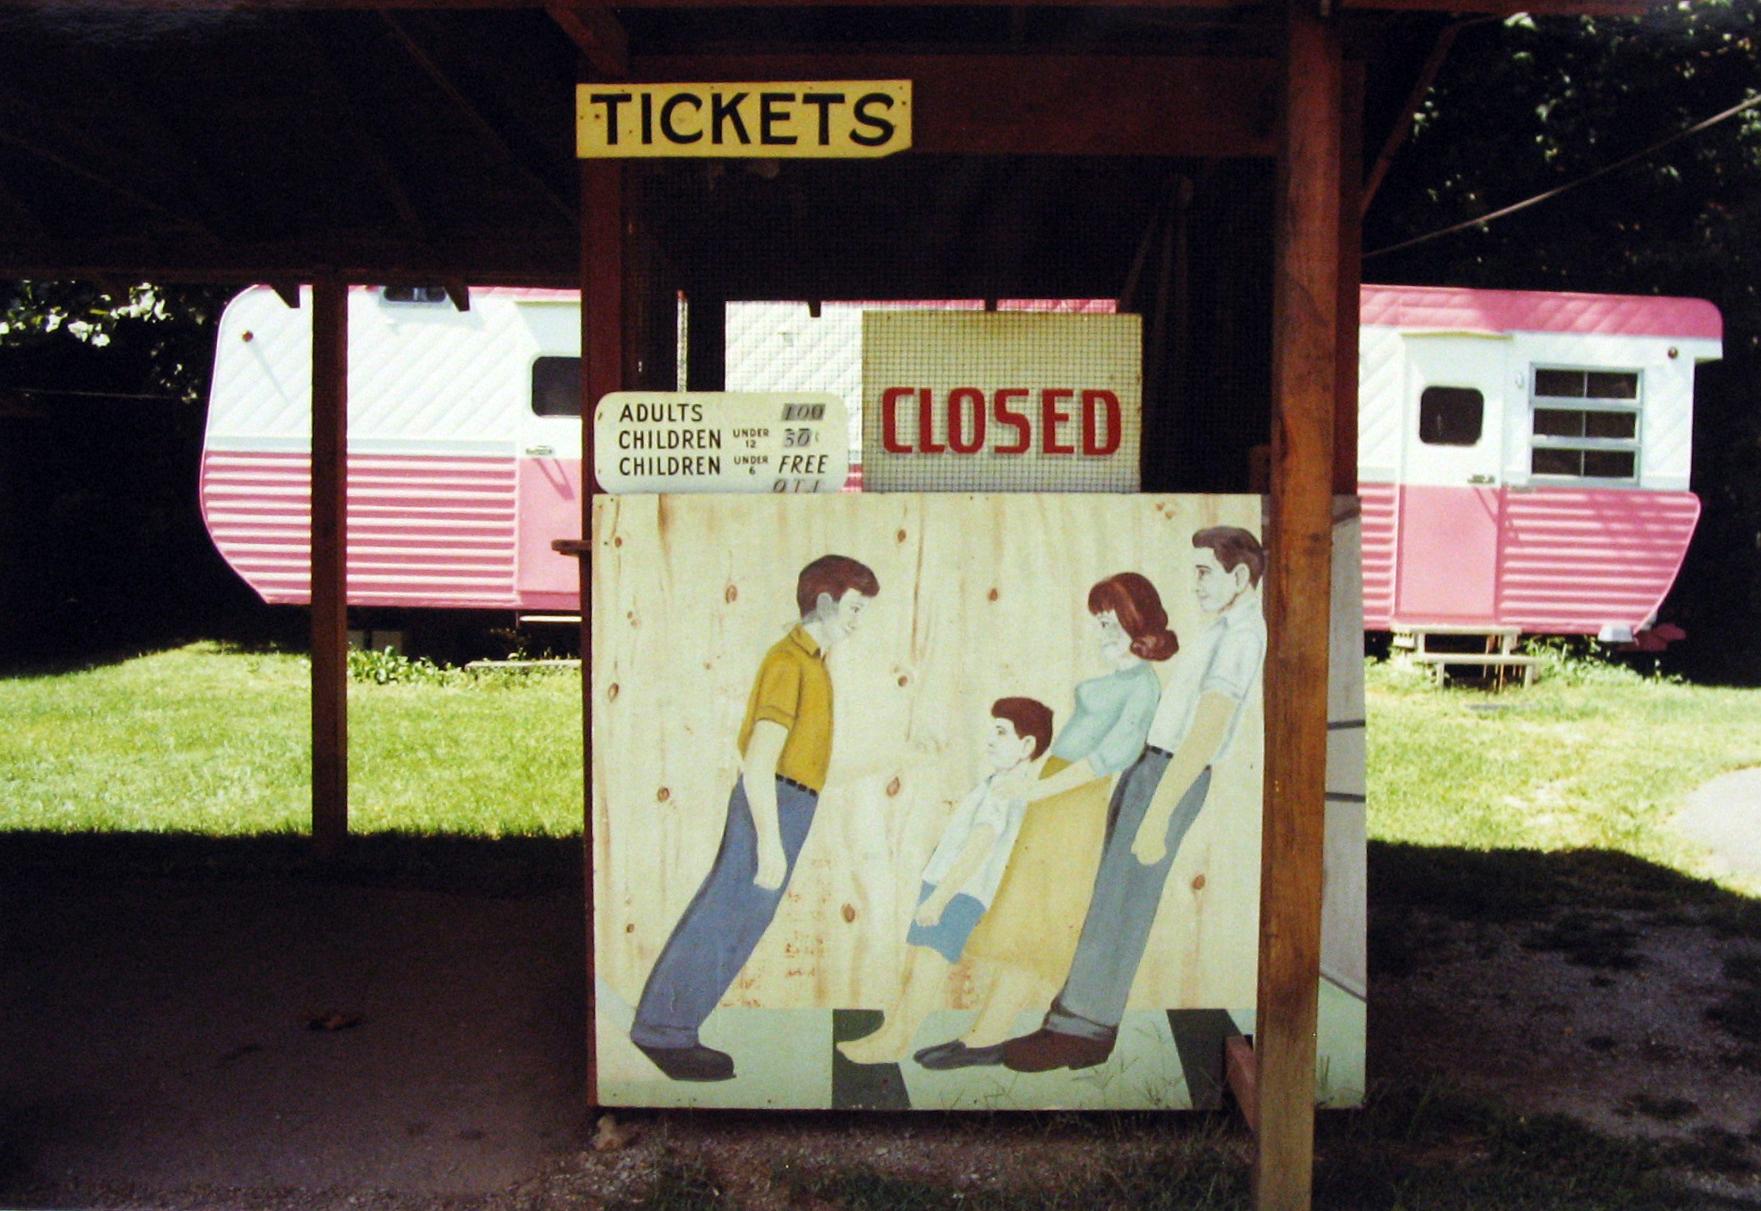 Pink Trailer Tilt, North Carolina by Ken Brown is a 9 1/4 x 13 1/2 inch Ektacolor print. This photograph features a ticket booth with painted leaning figures, in front of a pink and white trailer. This photograph is titled and signed with the